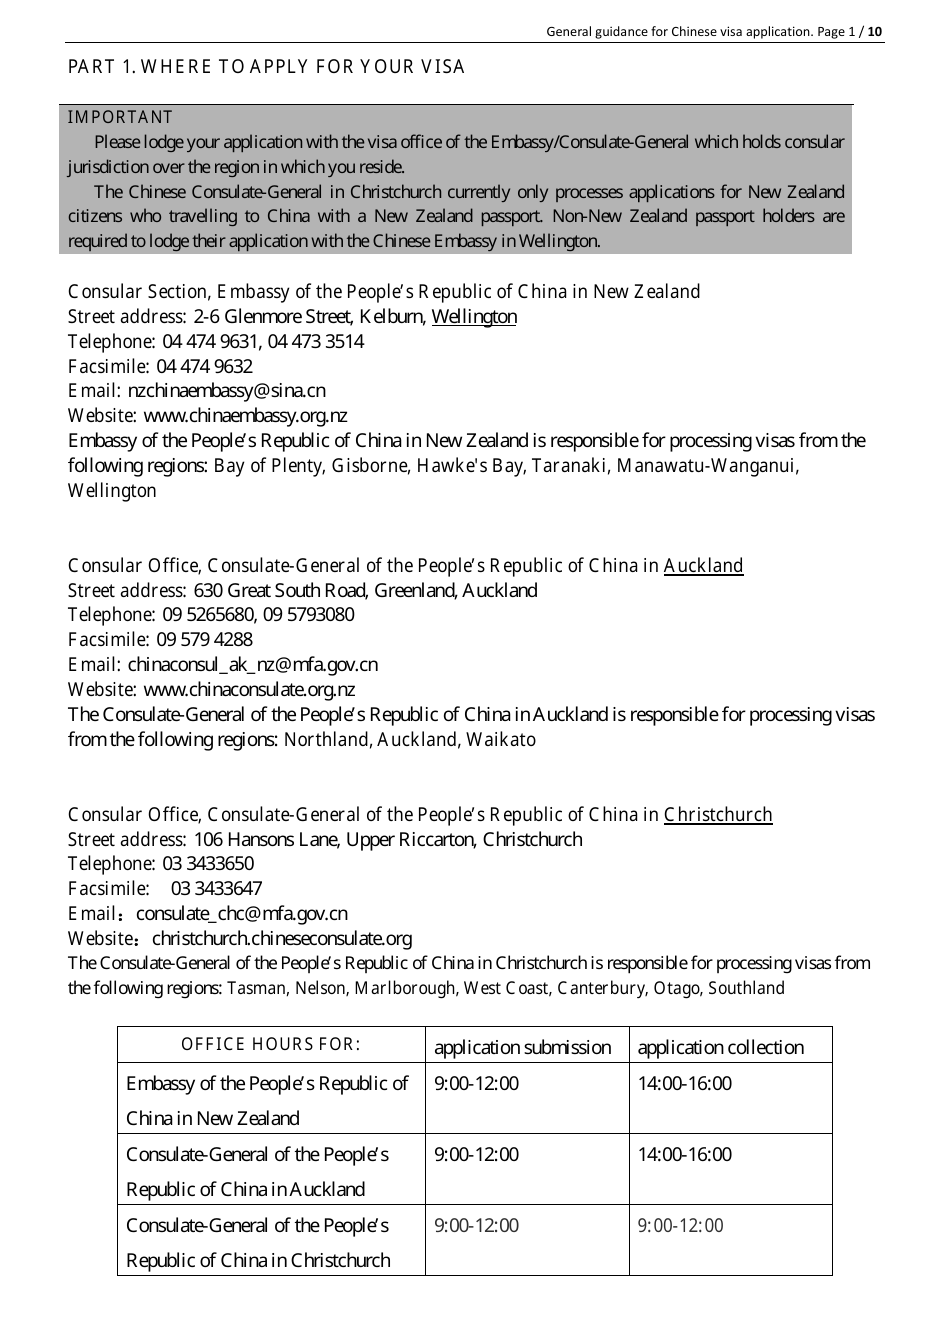 Form V2013 Chinese Visa Application Form - Embassy of the People's Republic of China - Wellington, New Zealand, Page 1